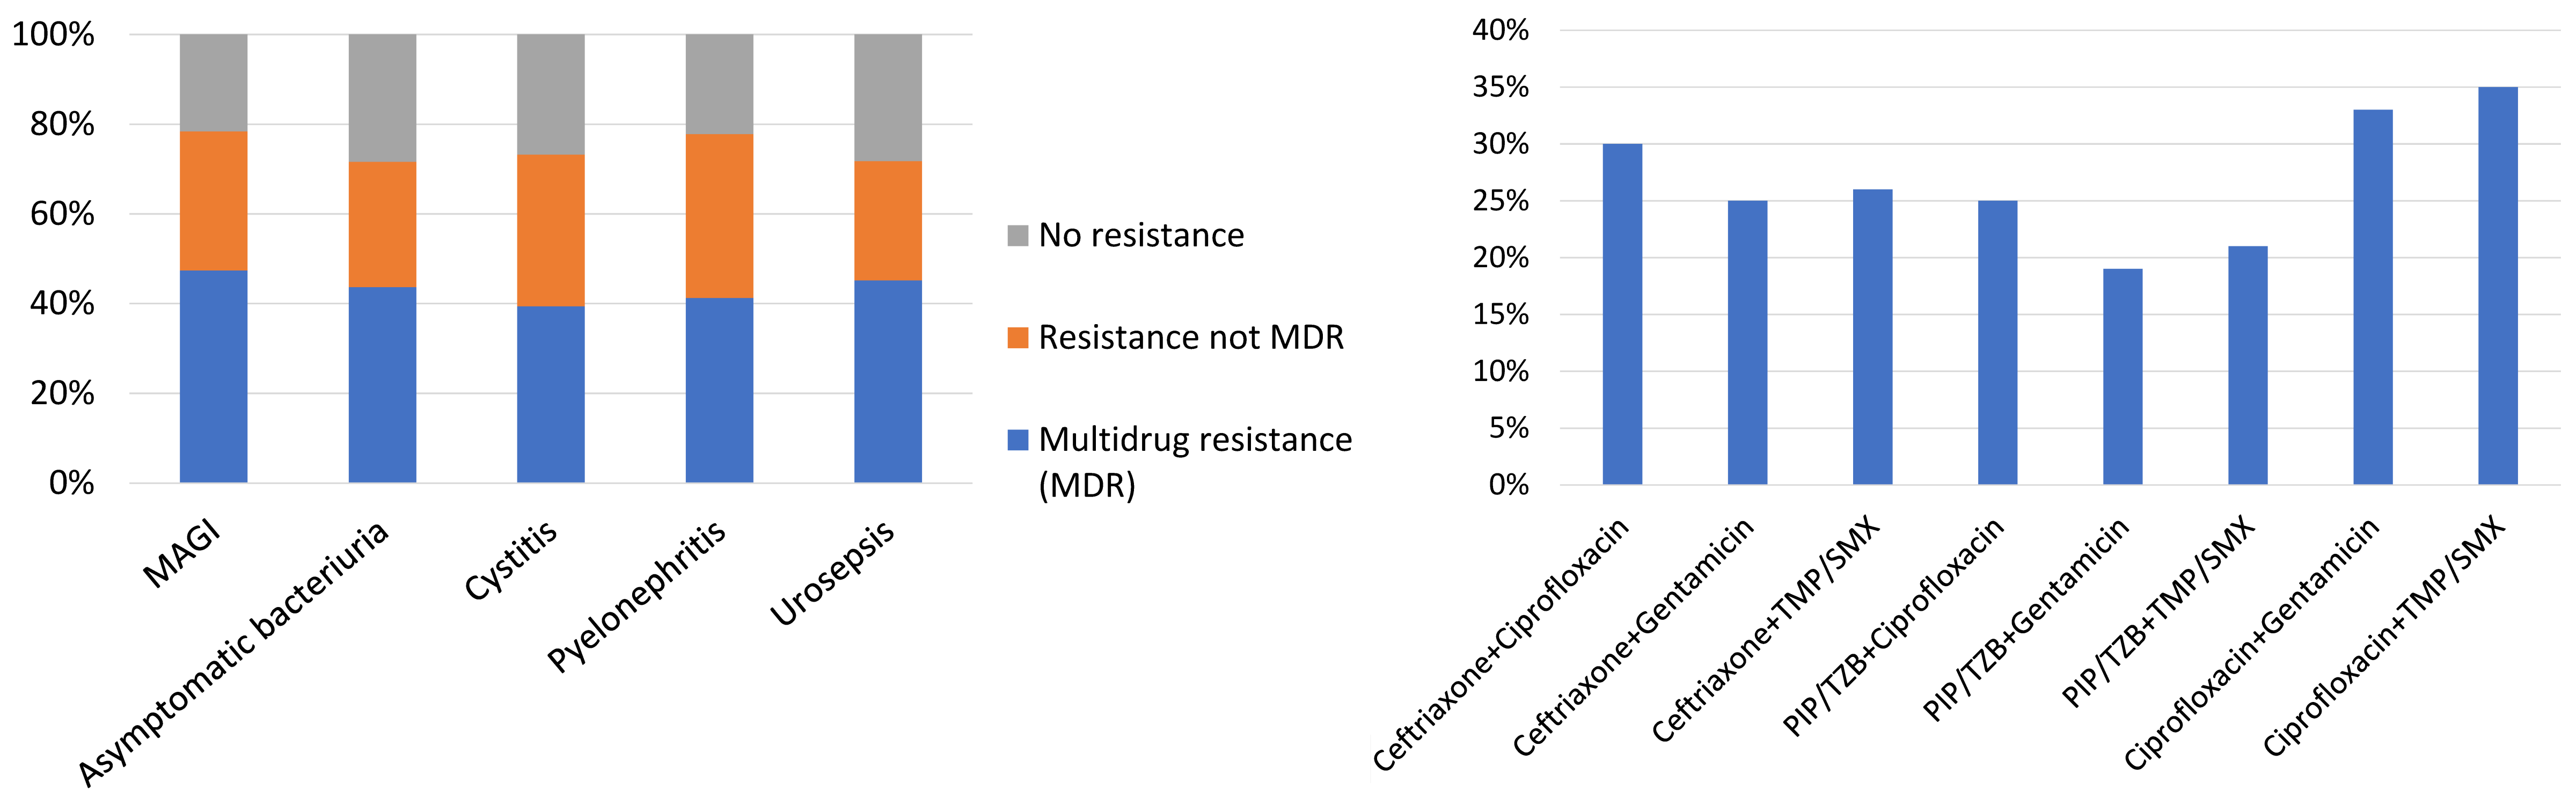 Figure 5: Resistance patterns to antibiotics in patients with HAUTIs from the GPIU study 2003–2013; left: prevalence of multidrug resistance (MDR) microorganisms; right: resistance rates for the main groups of antibiotics; MDR: multidrug resistance, MAGI: male accessory gland infection, ASB: asymptomatic bacteriuria, Cefta: ceftriaxone, Cipro: ciprofloxacin, Genta: gentamicin, TMP/SMX: trimethoprim-sulfamethoxazole, Pip/Tzb: piperacillin/tazobactam